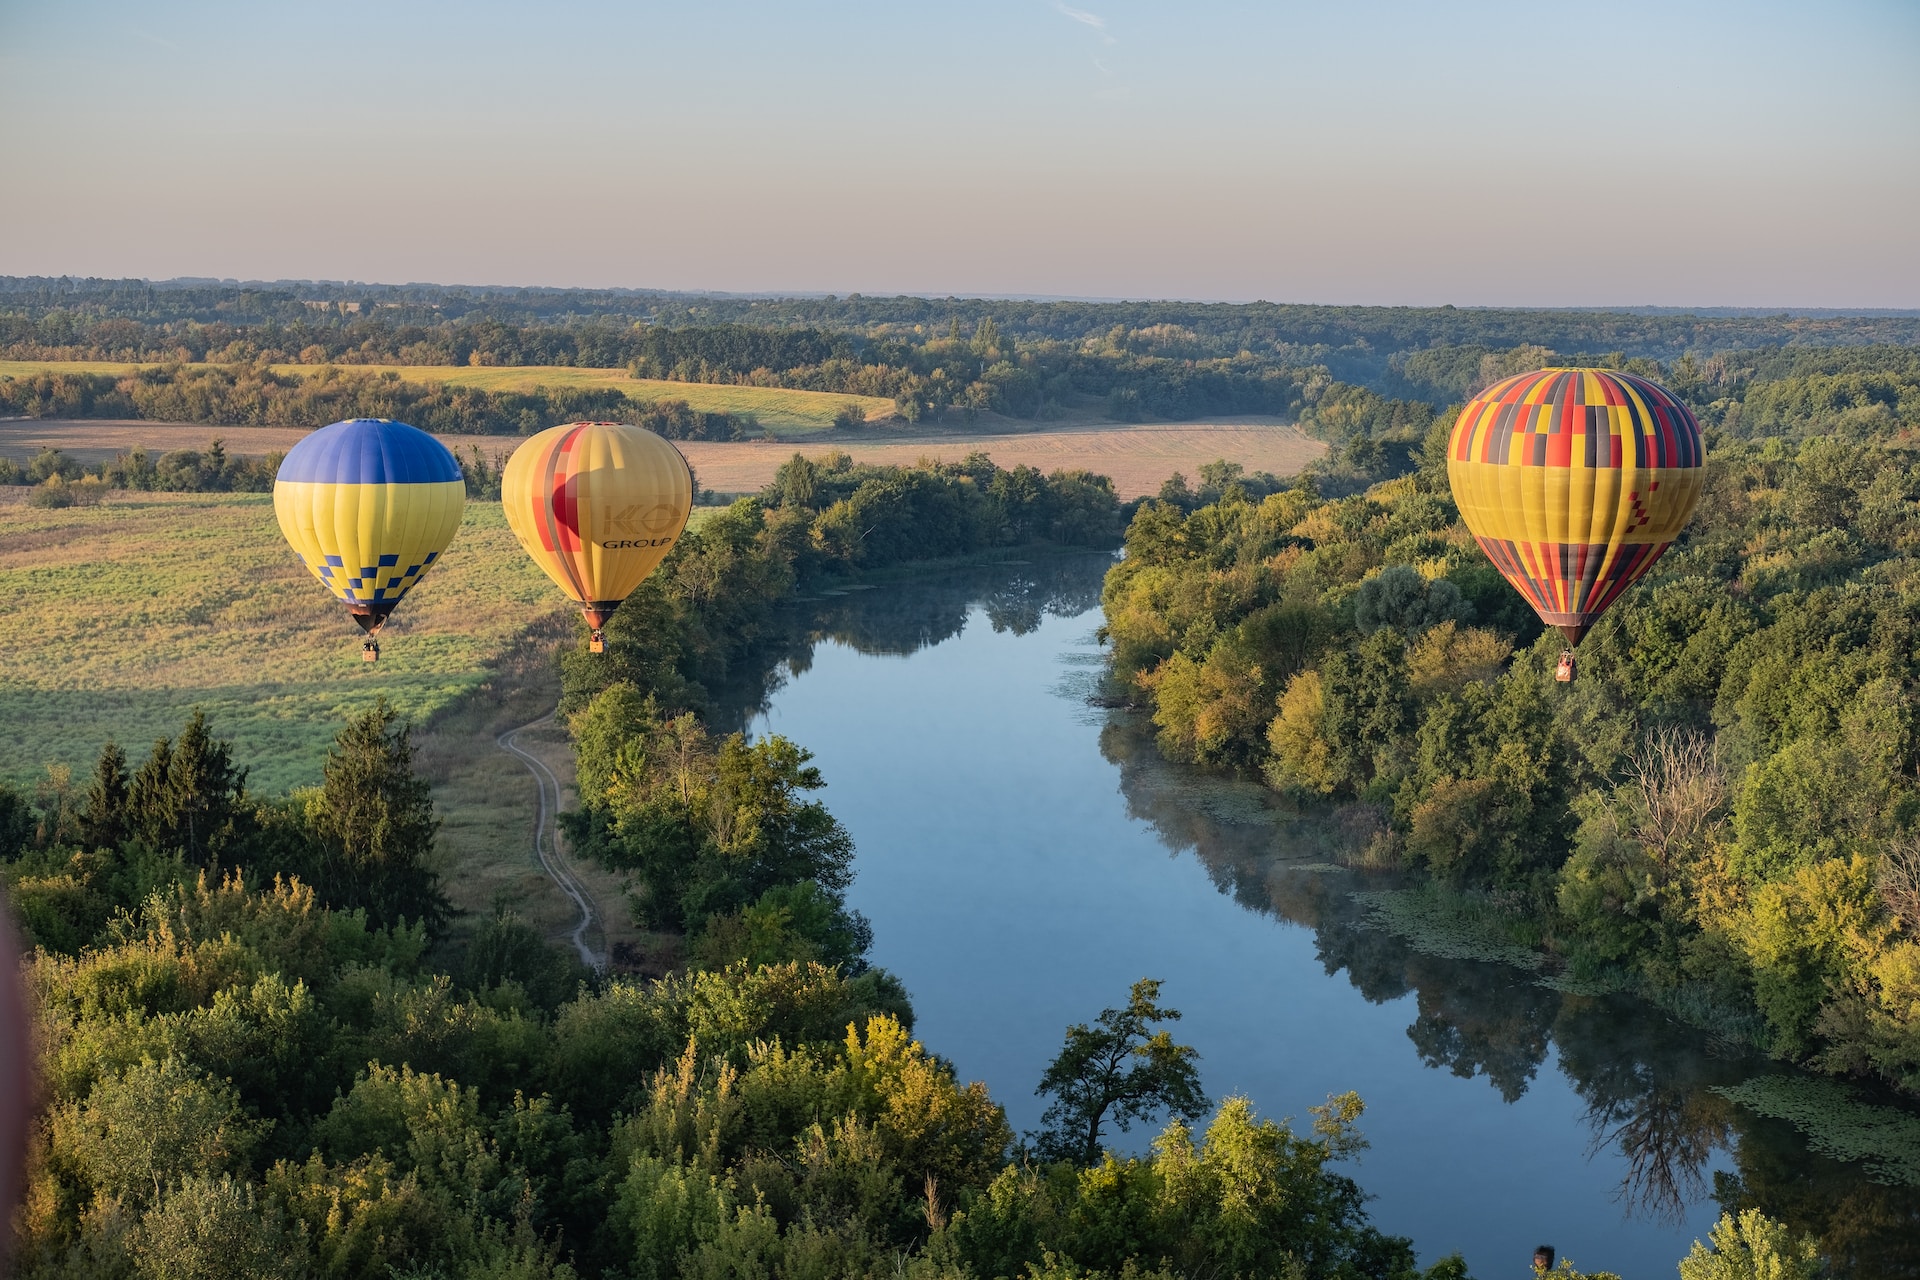 3 hot air balloons over fields and a river.